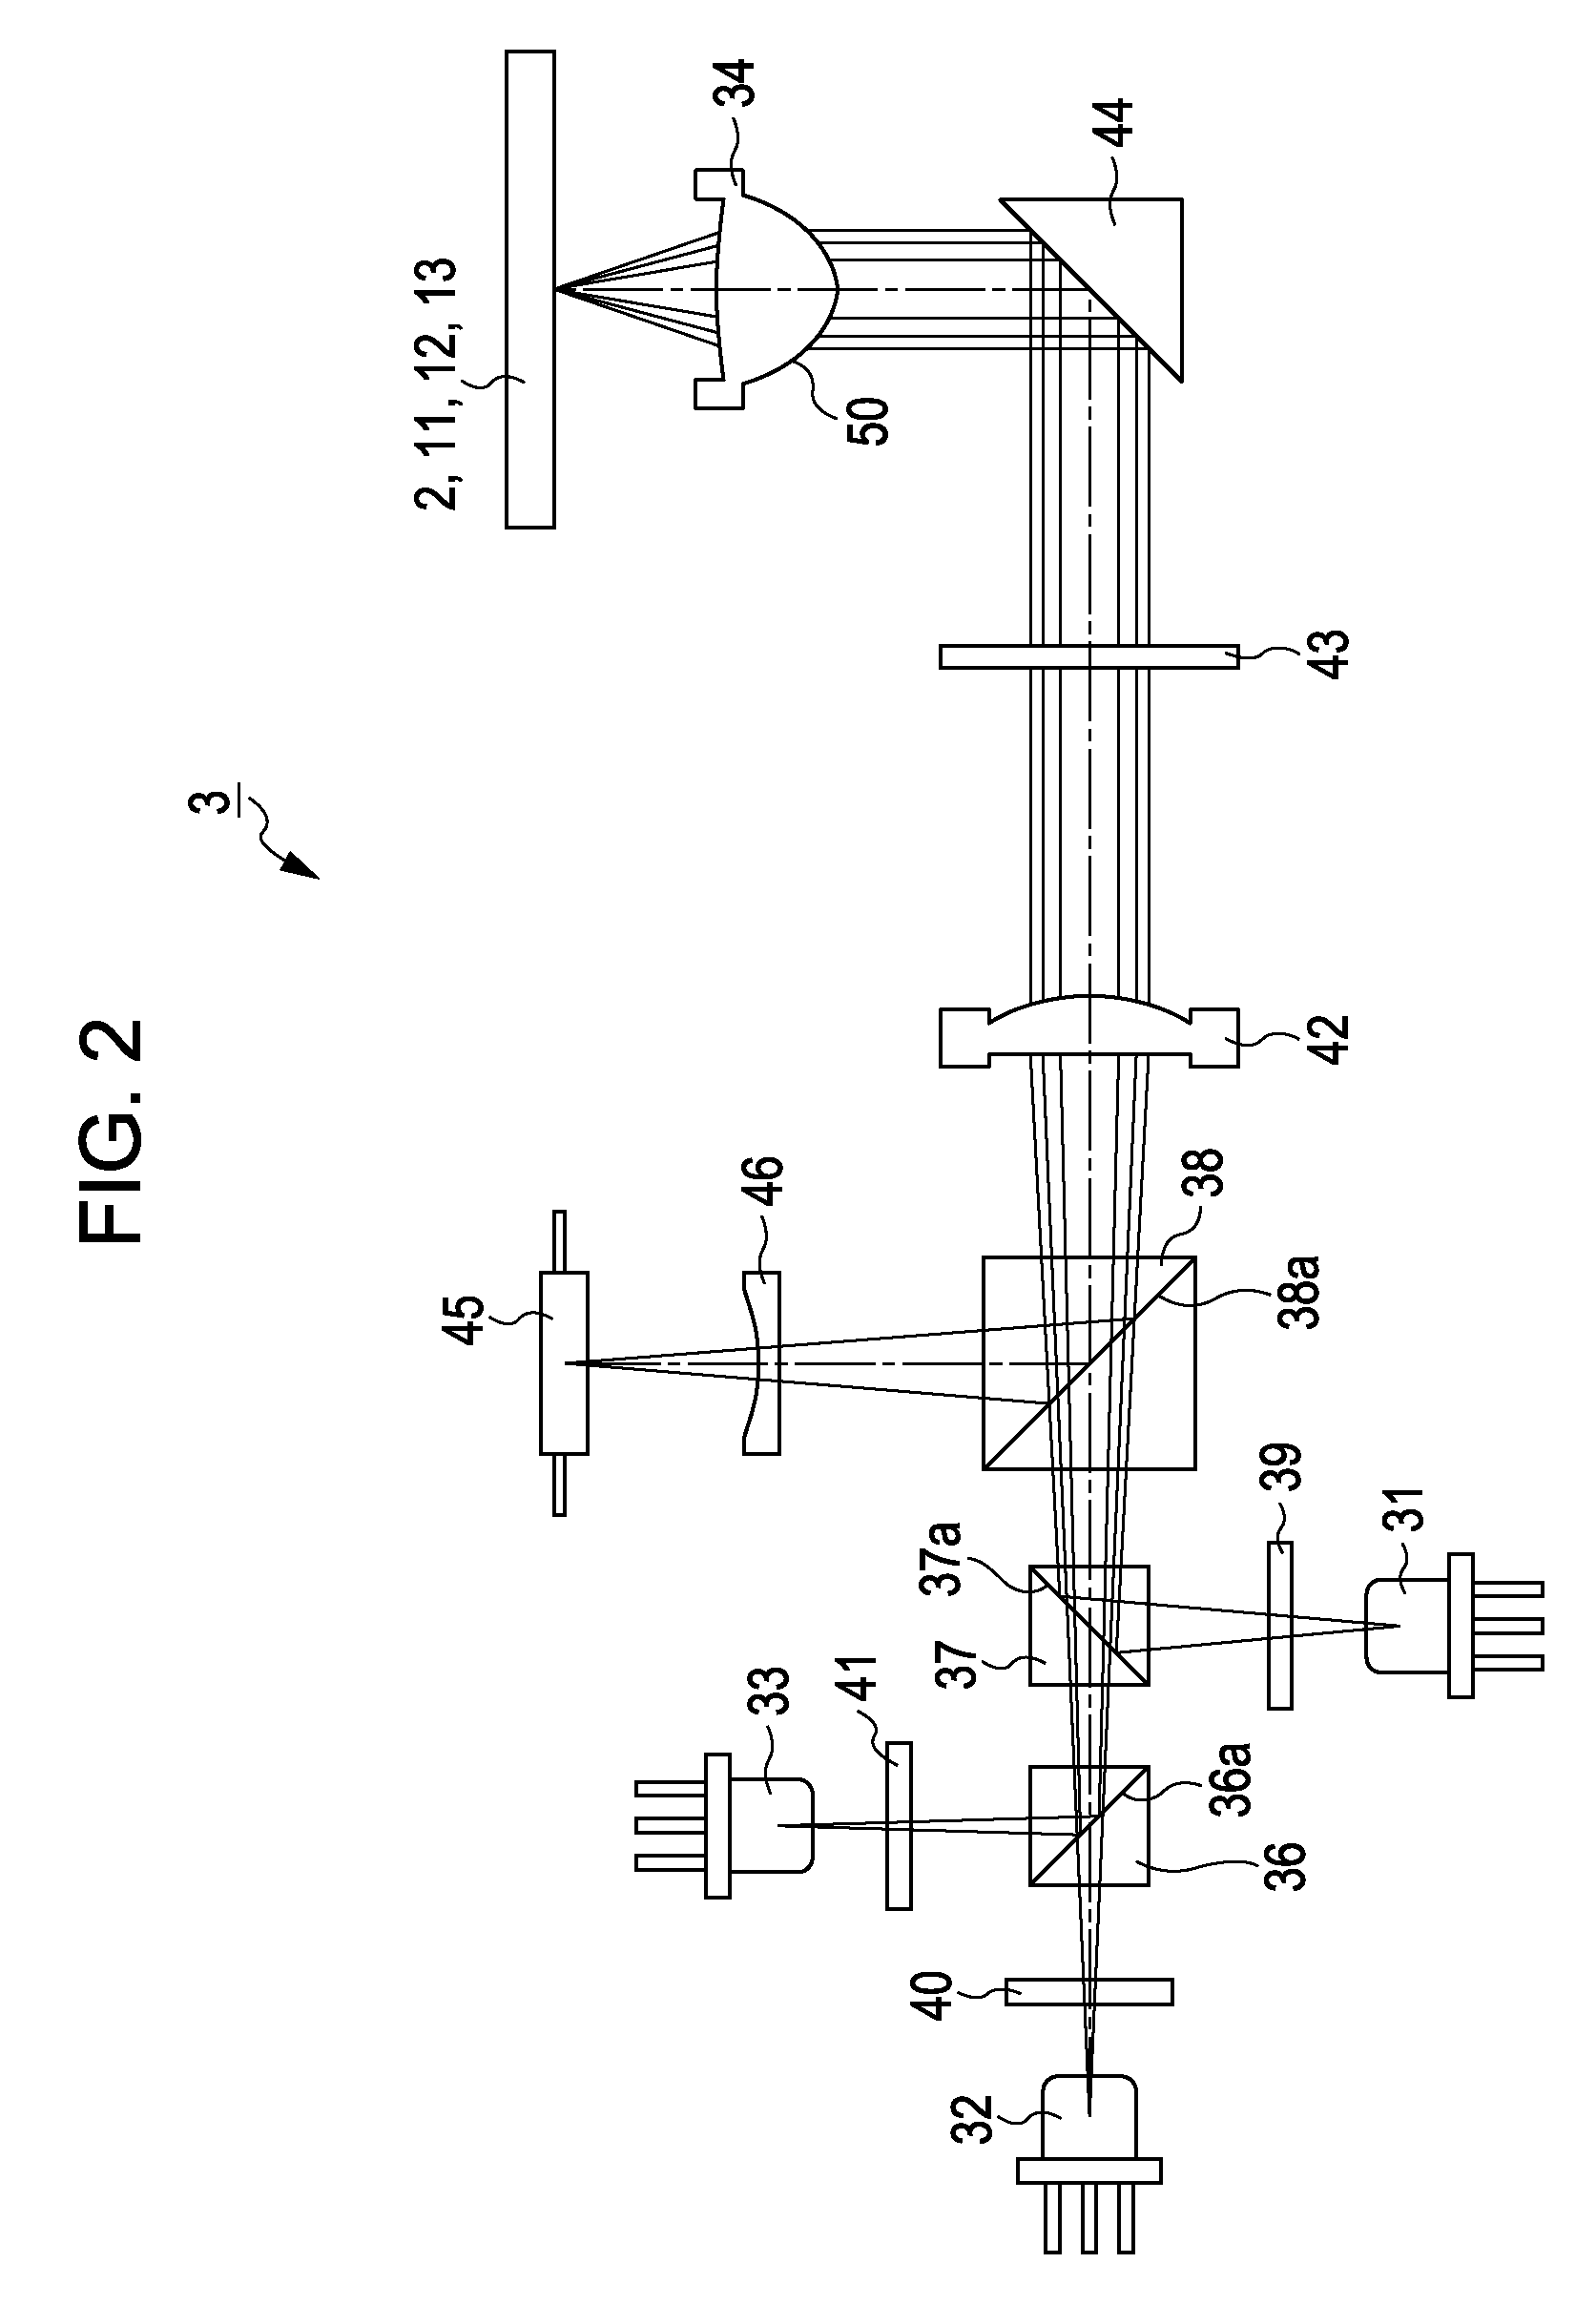 Objective lens, optical pickup, and optical disc apparatus